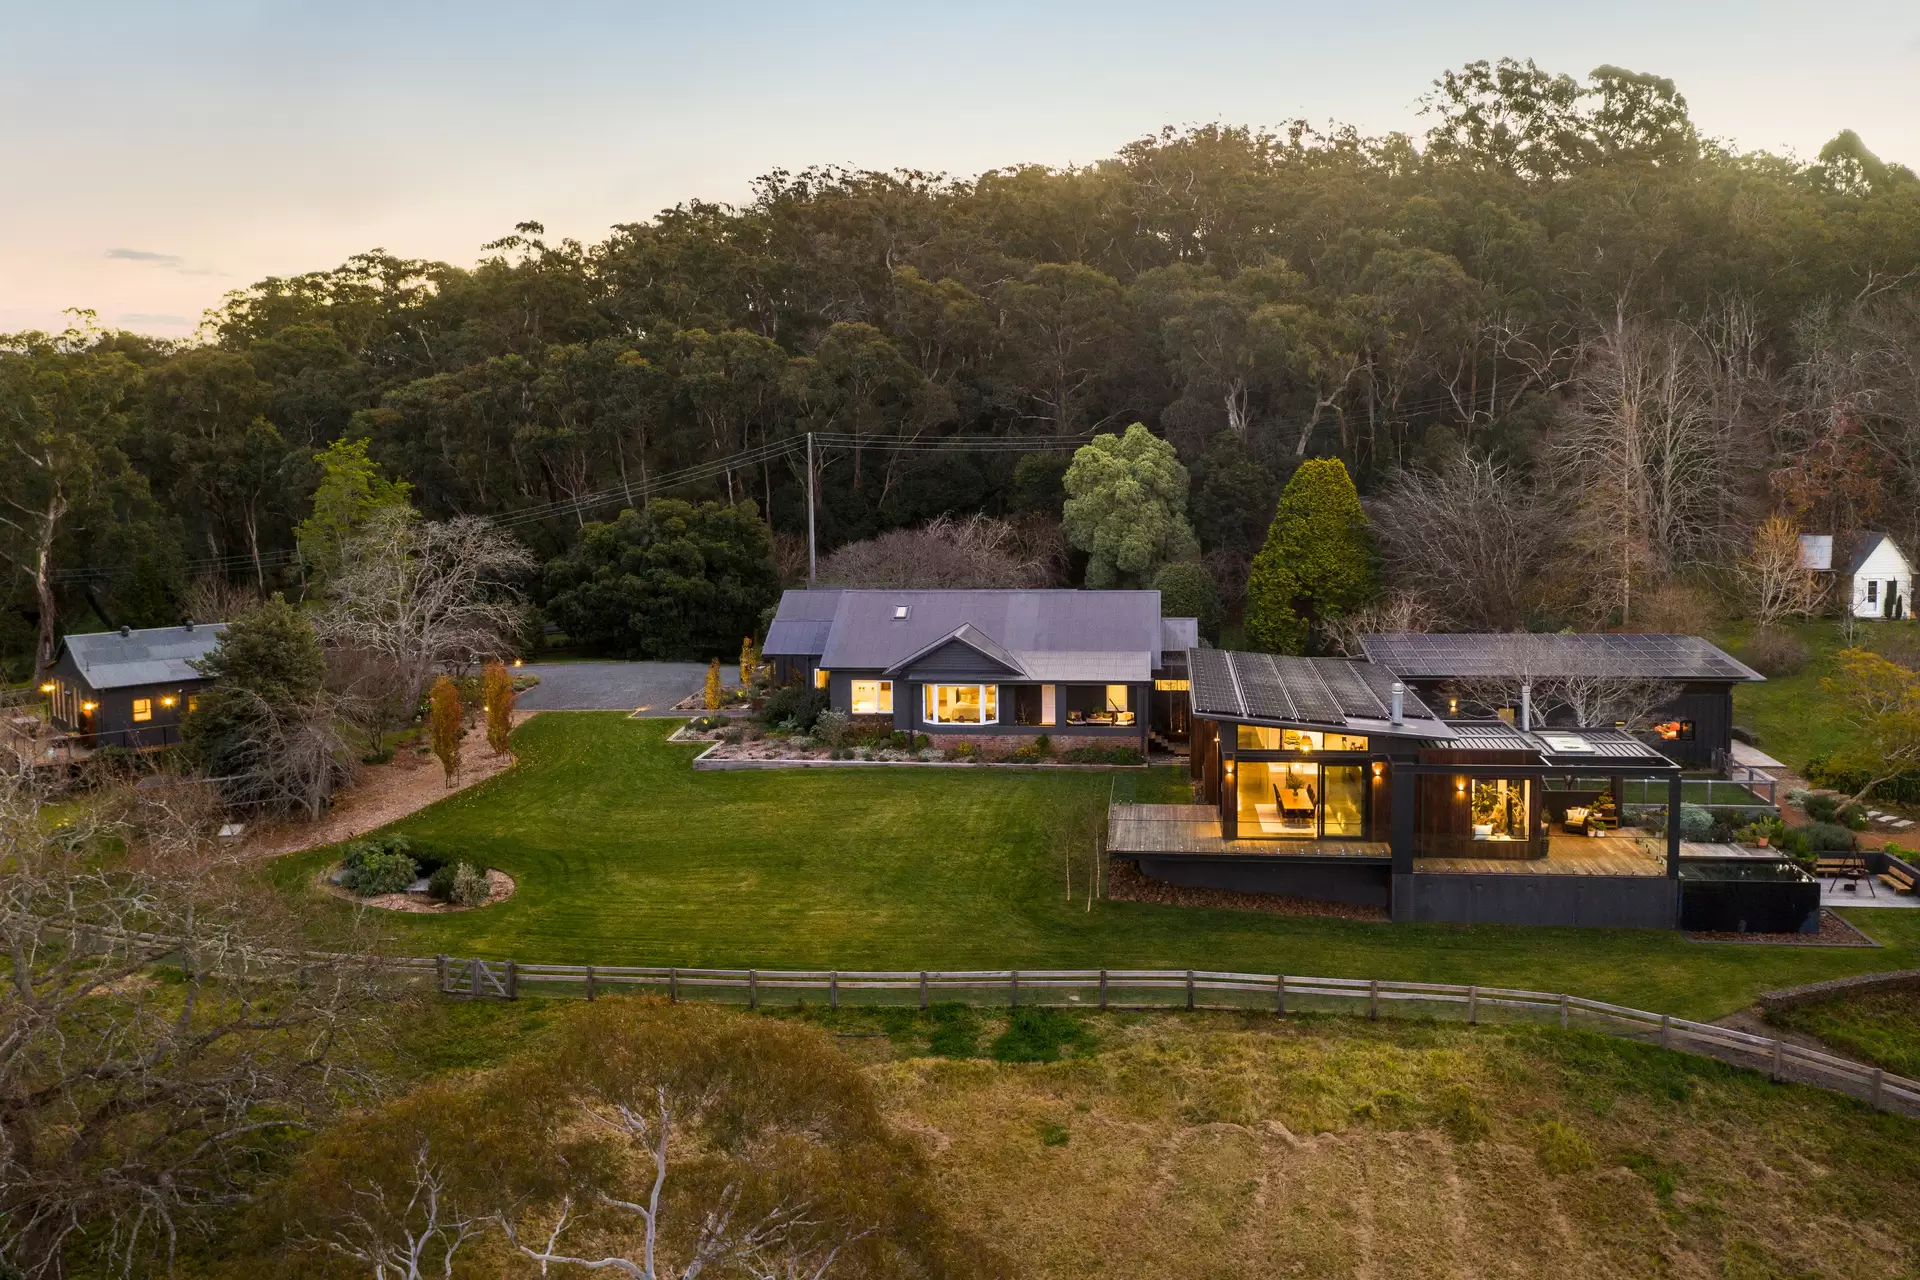 Photo #35: 110 Oxleys Hill Road, Bowral - Sold by Drew Lindsay Sotheby's International Realty